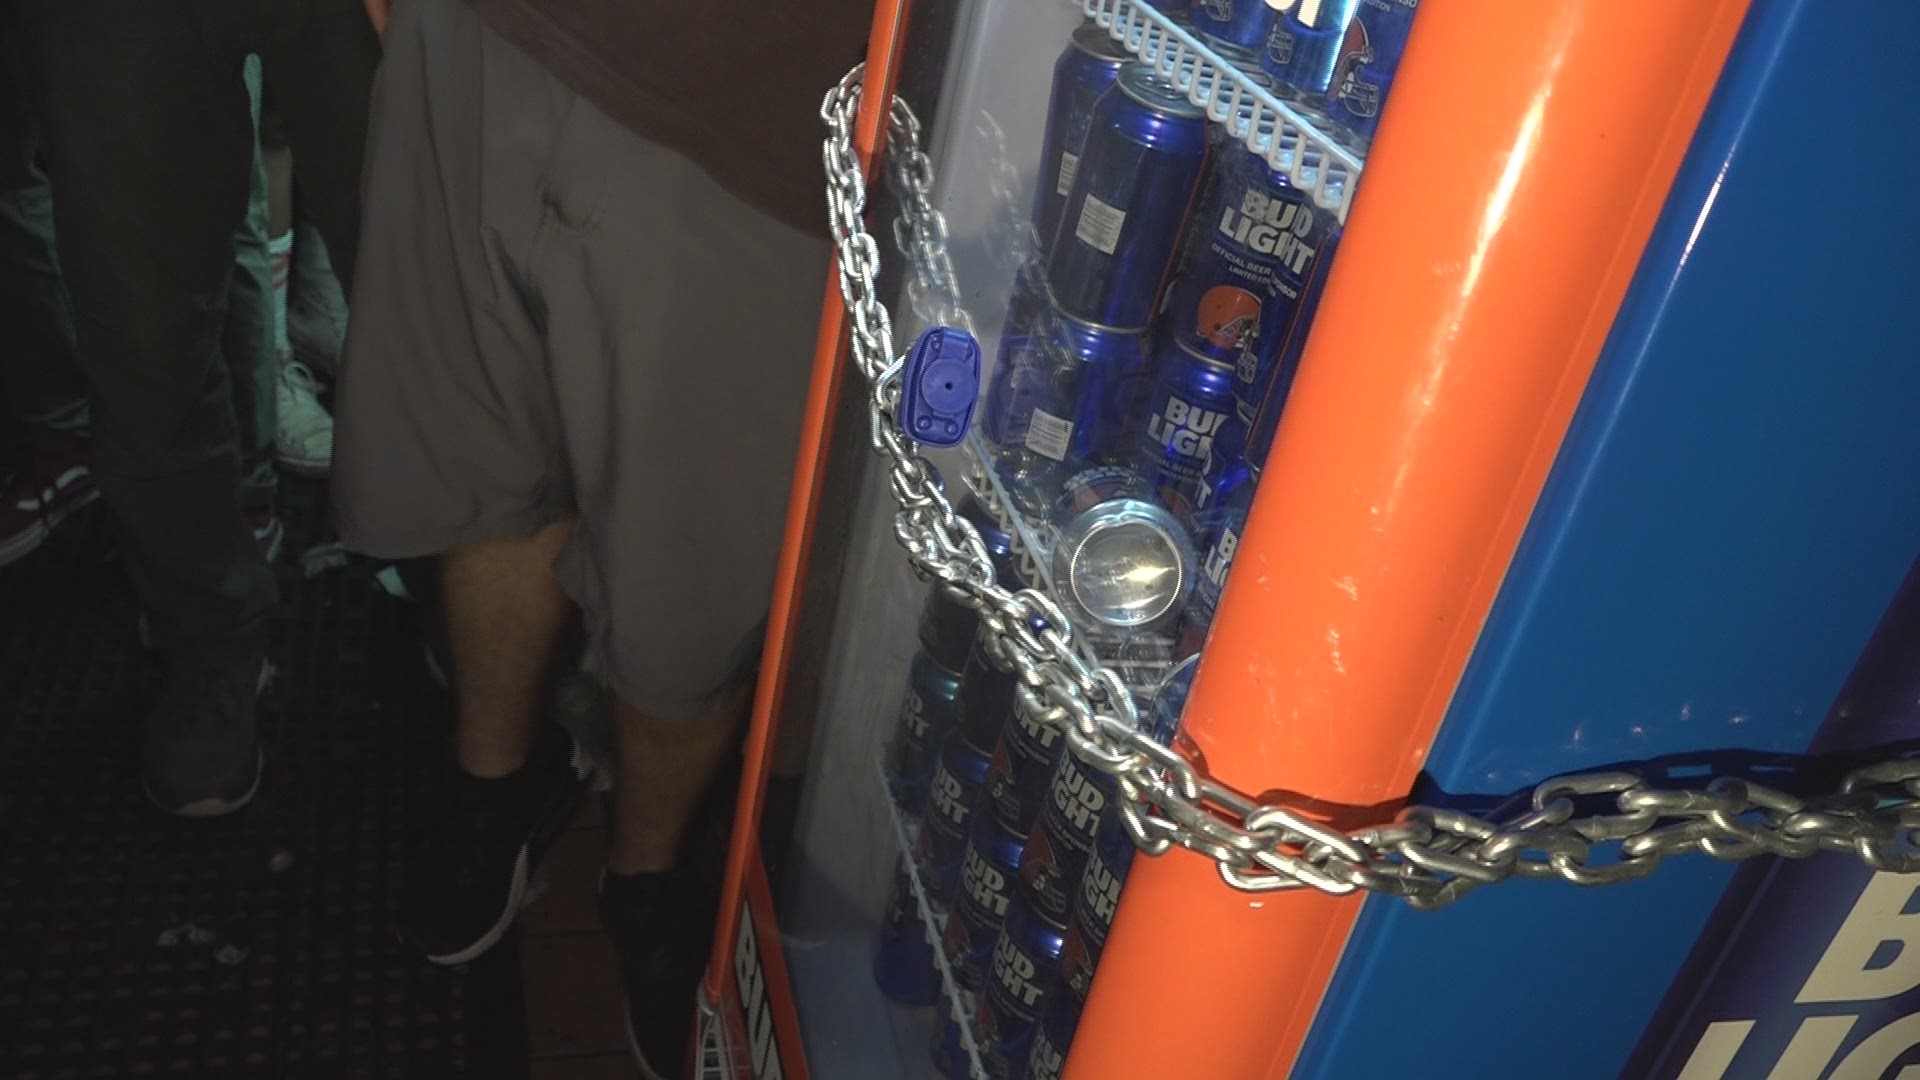 Barley House opened the fridges to elated Browns fans to pass out free Bud Light.